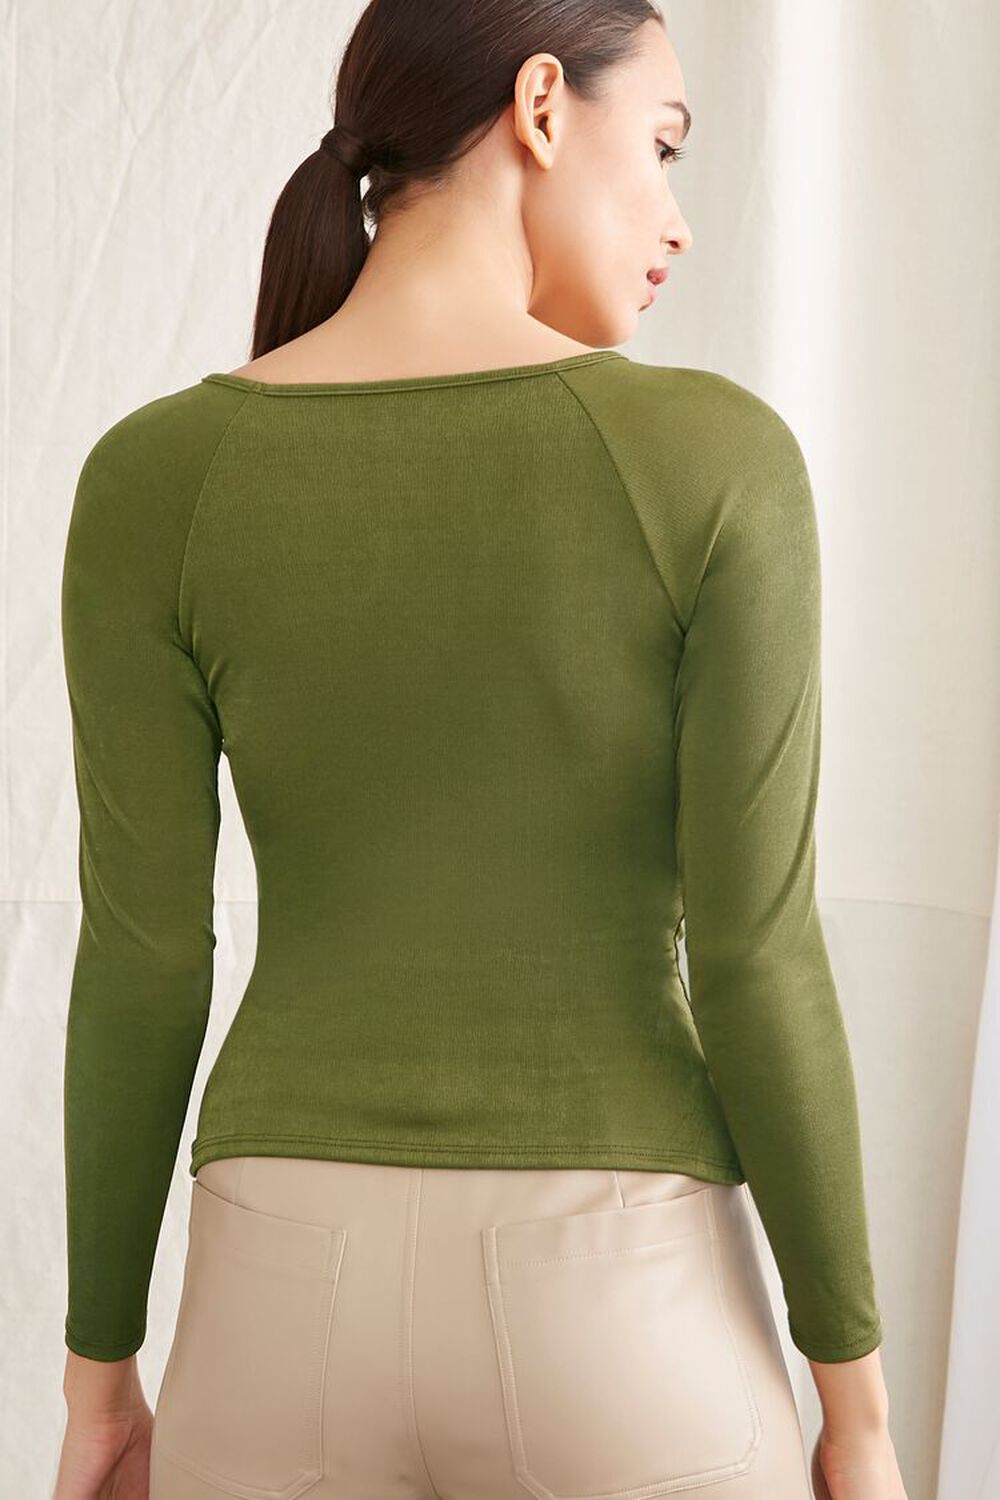 OLIVE Cutout Form-Fitting Top, image 3